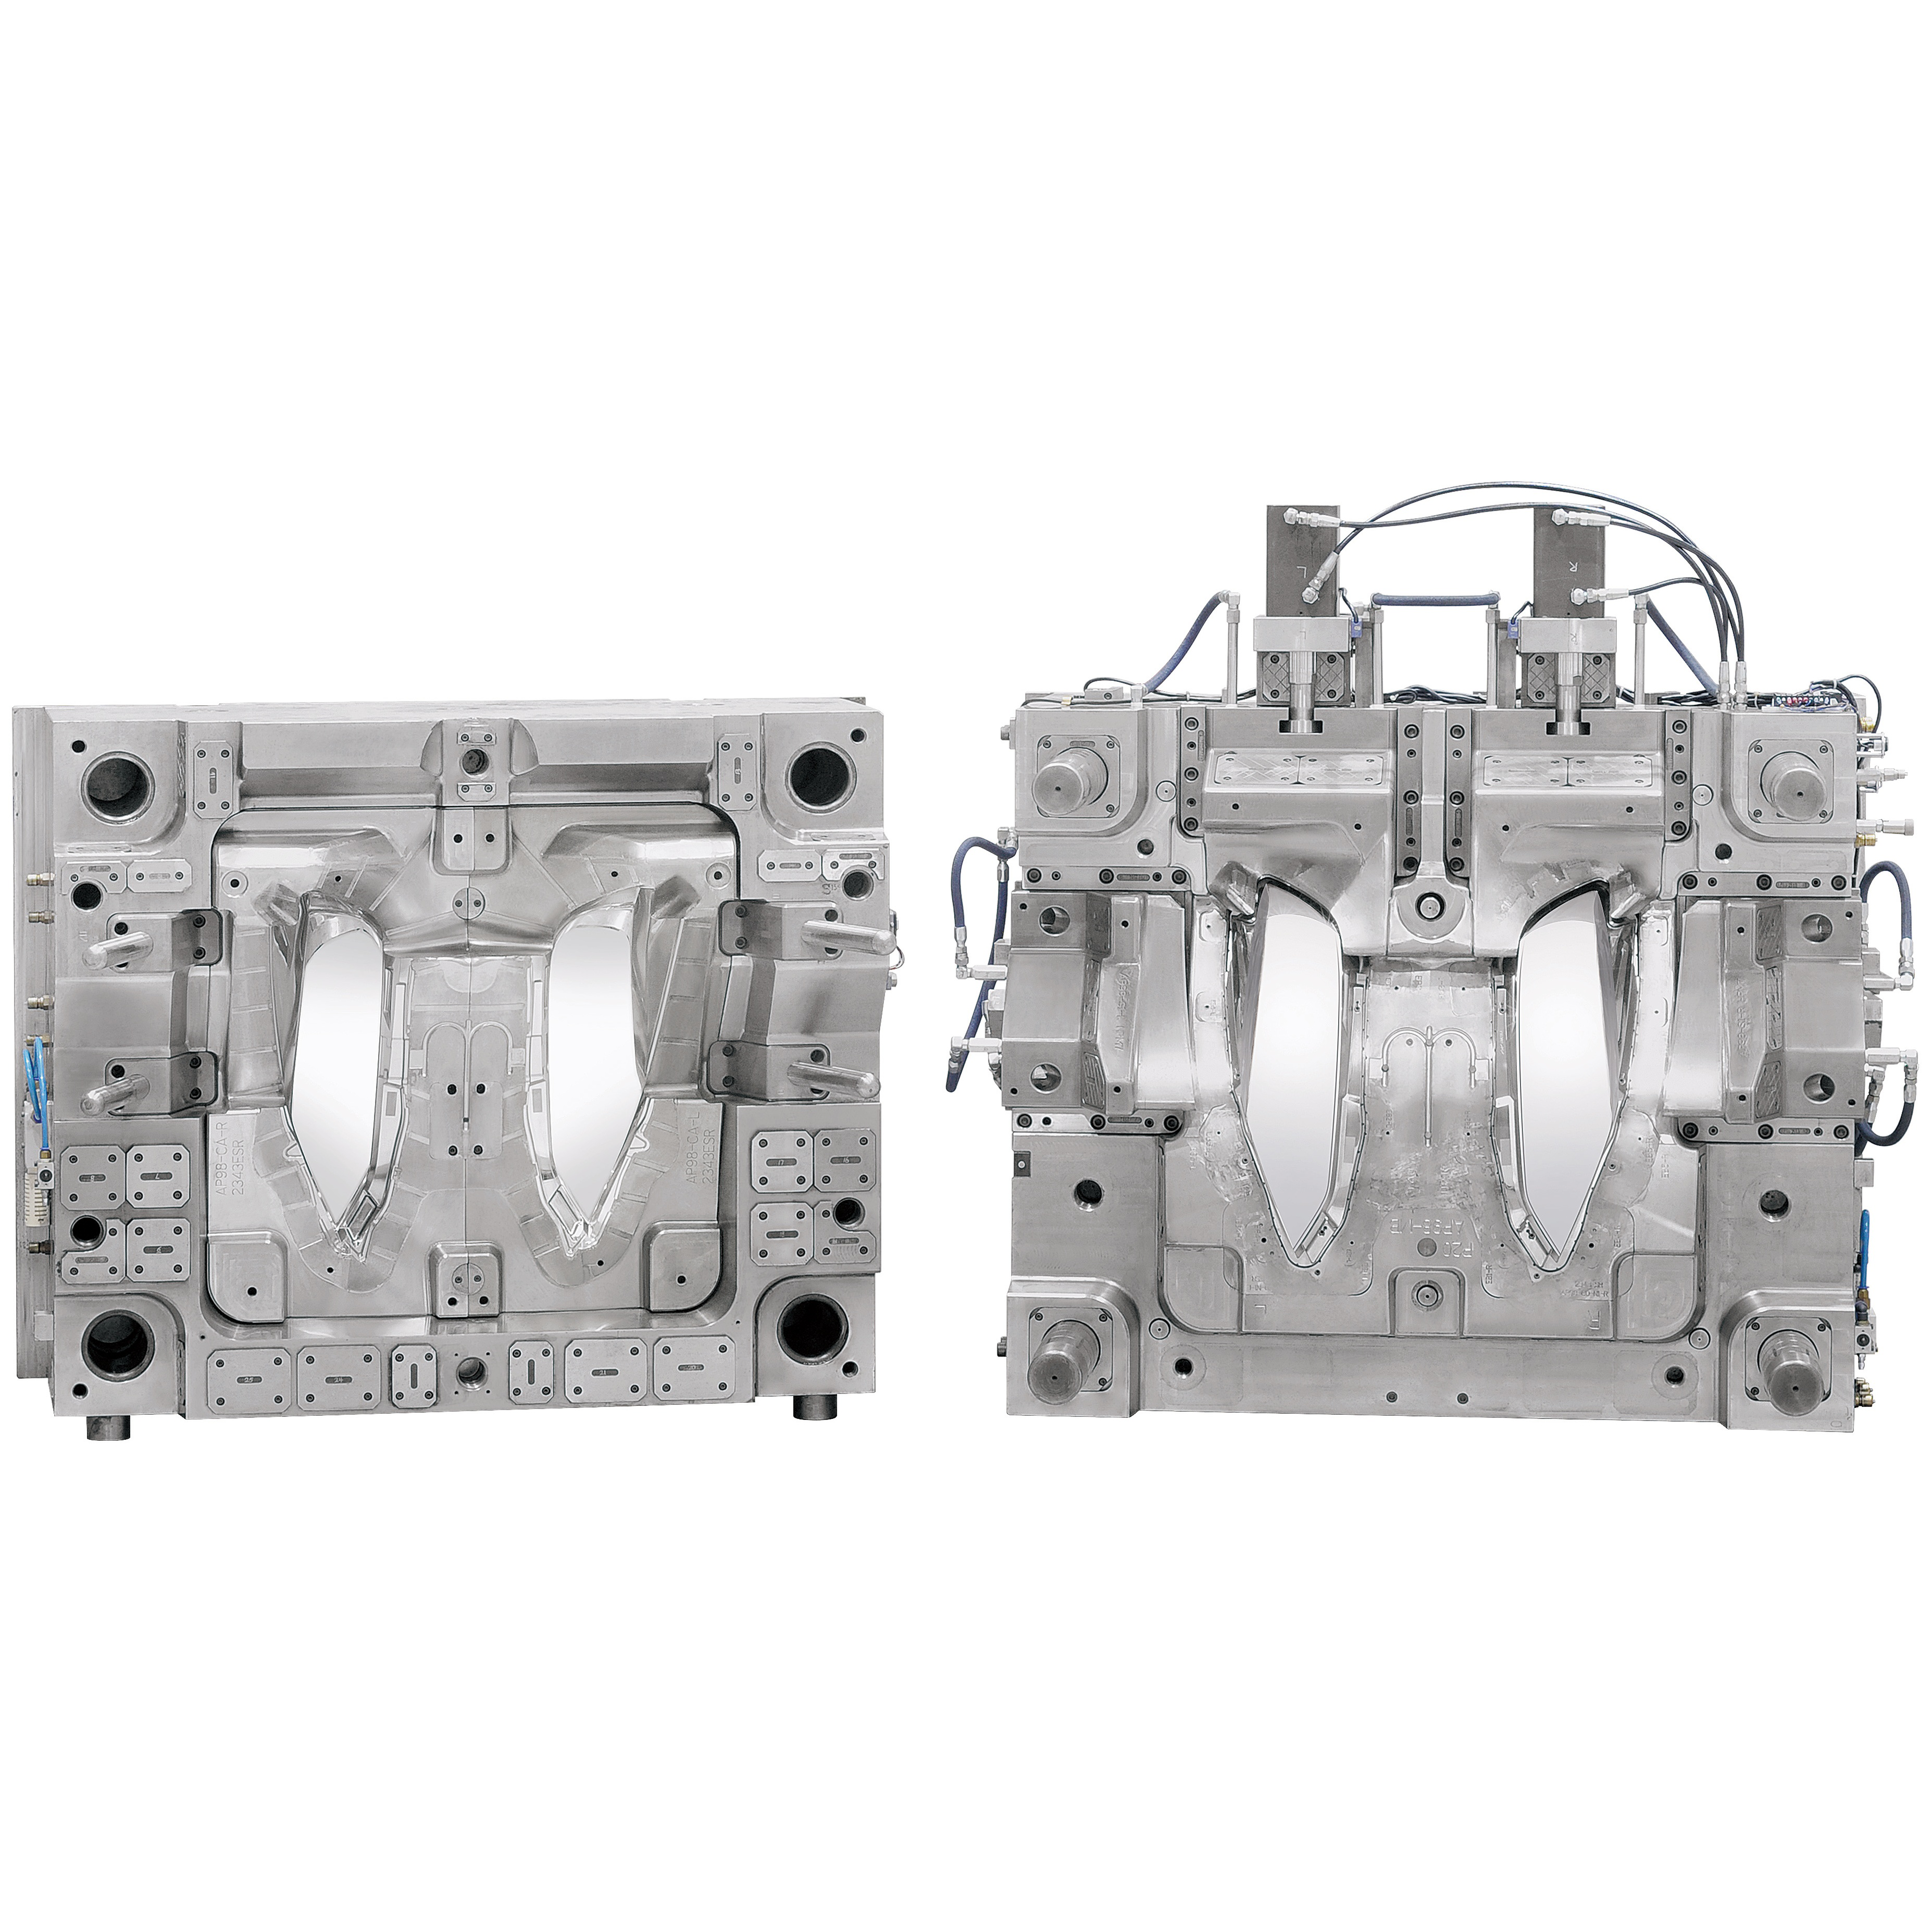 Injection Molds – Precision Tools for Plastic Injection Manufacturing